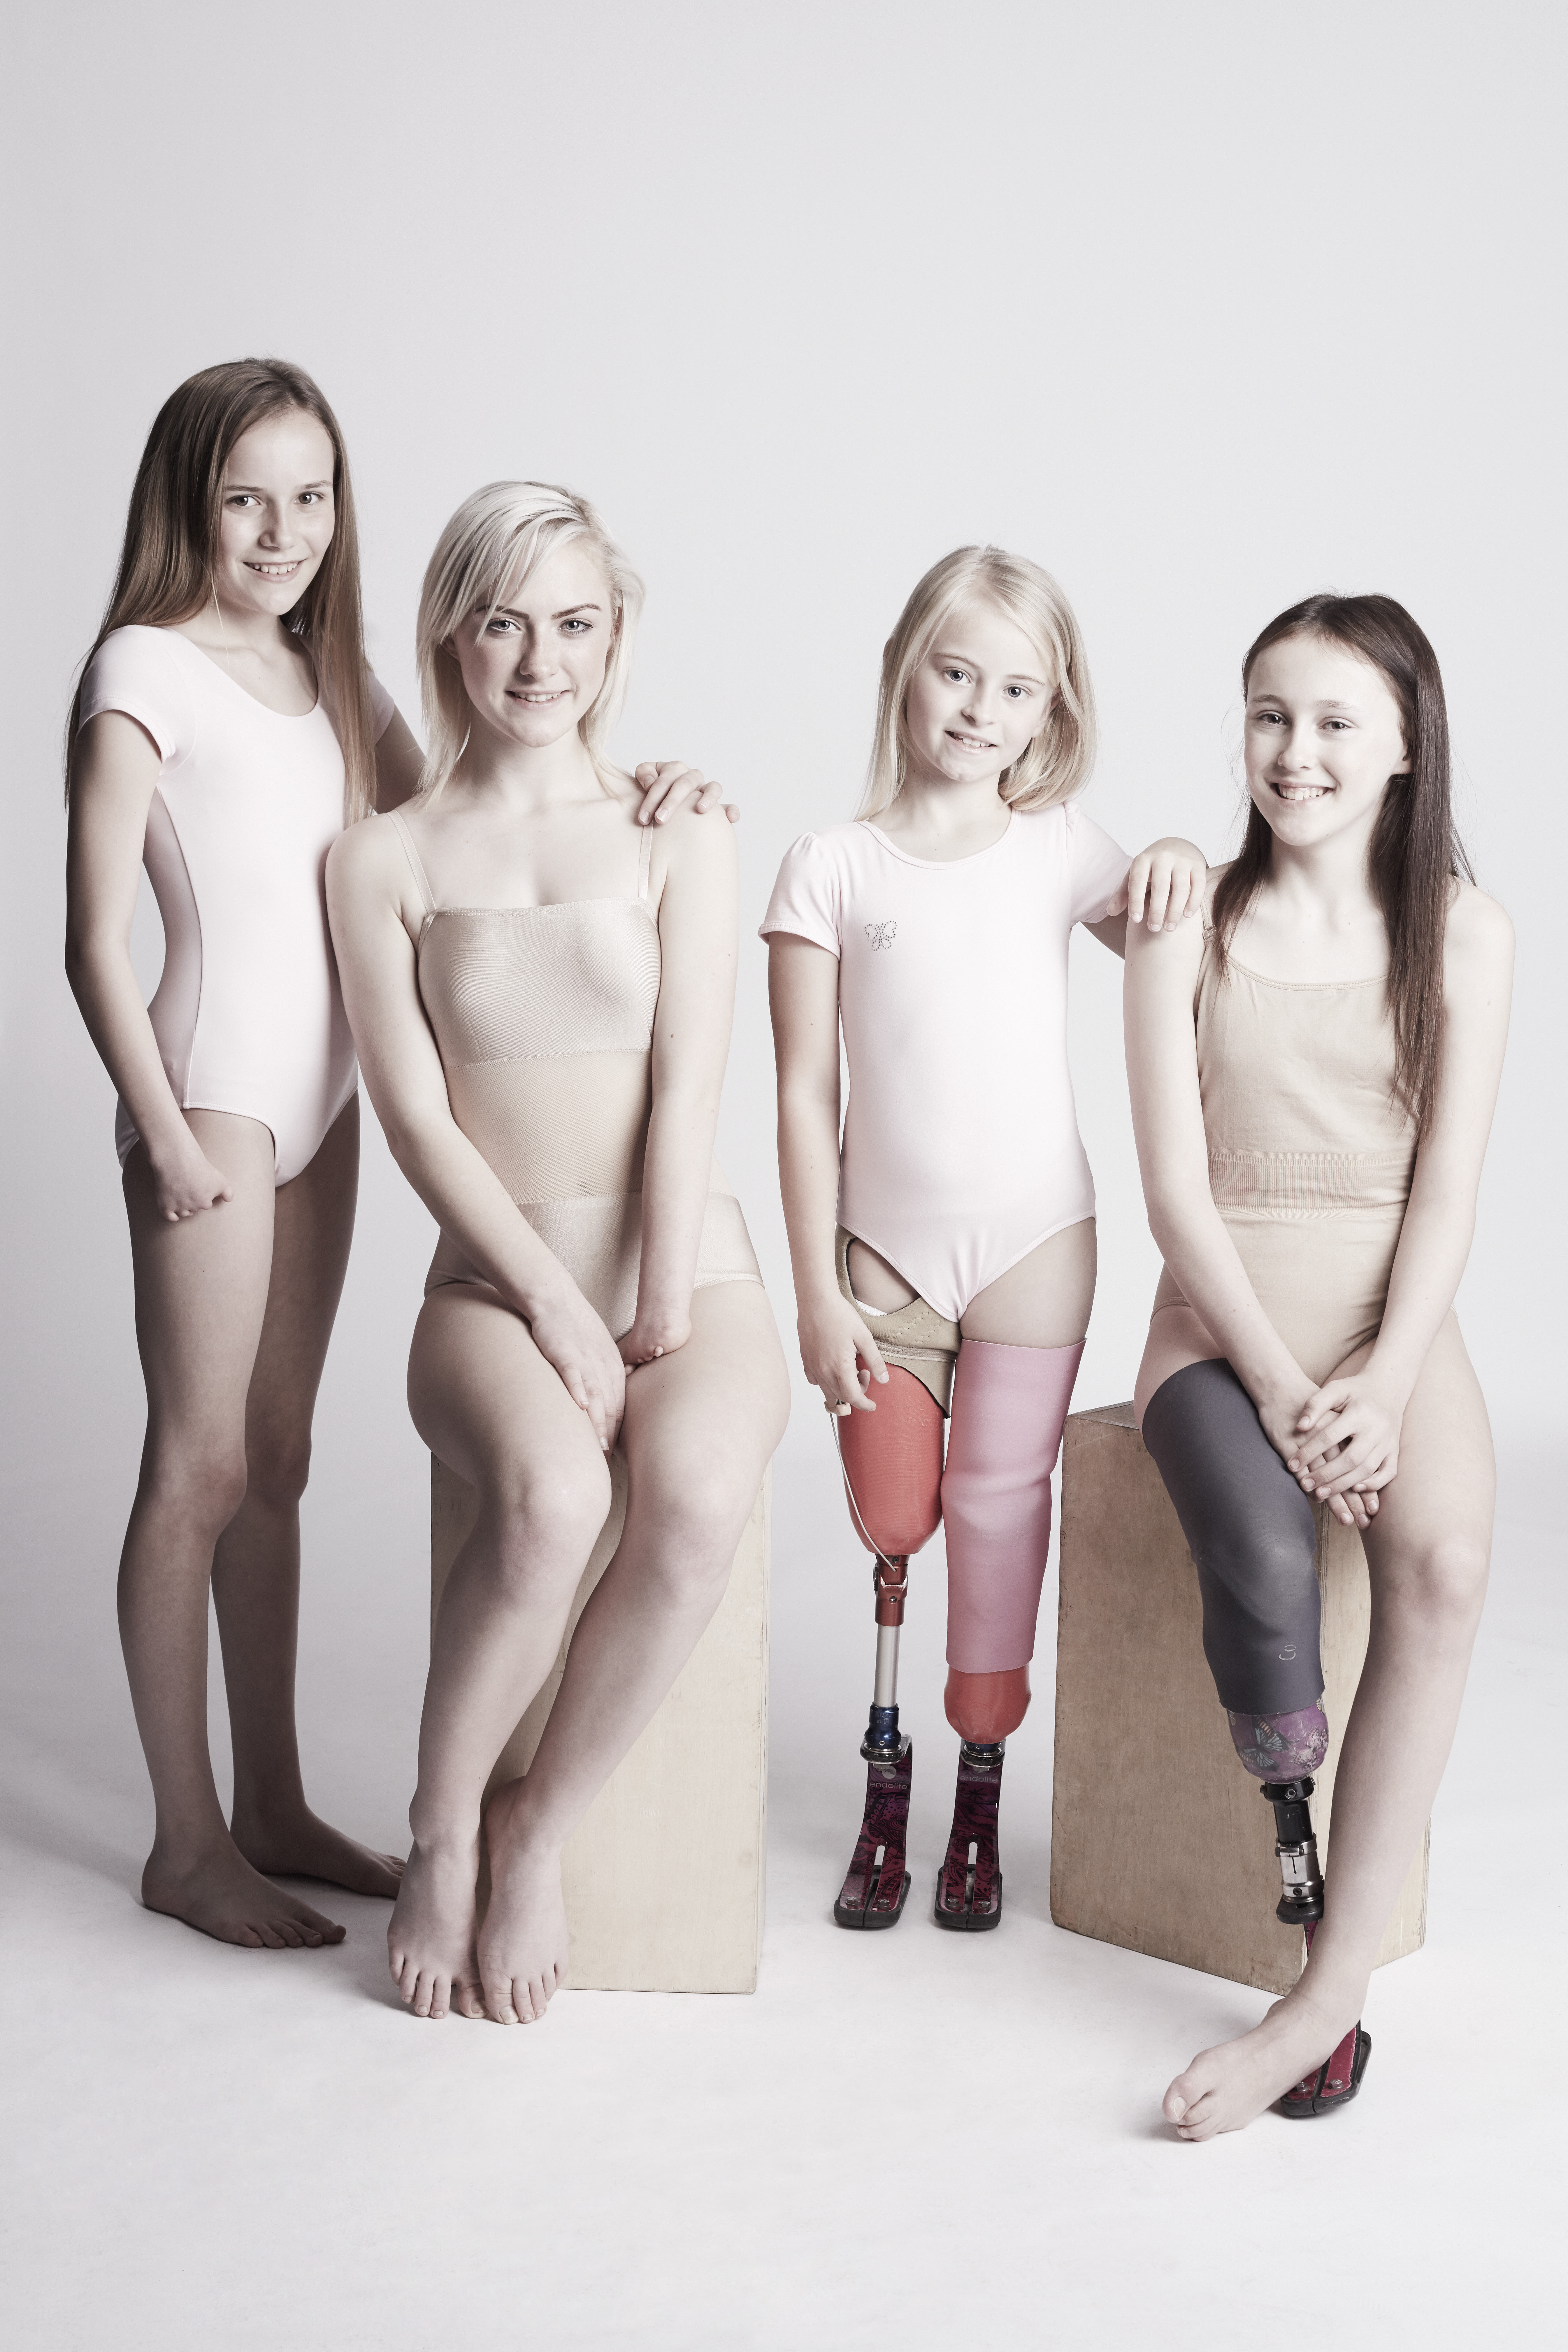 Children with limb differences